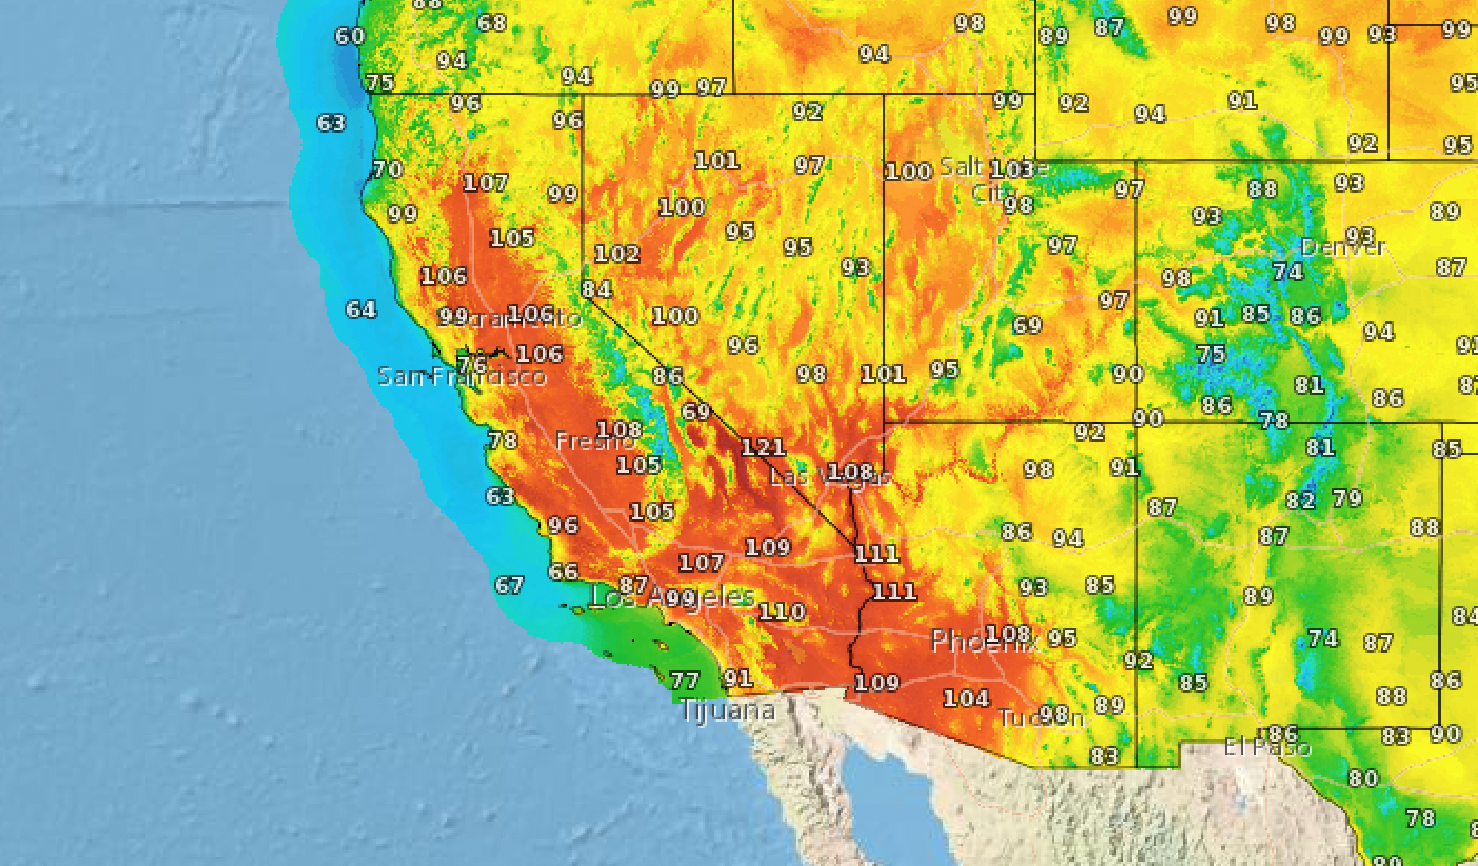 High temperatures forecast for Labor Day in California and other western states, as a major heatwave sweeps through